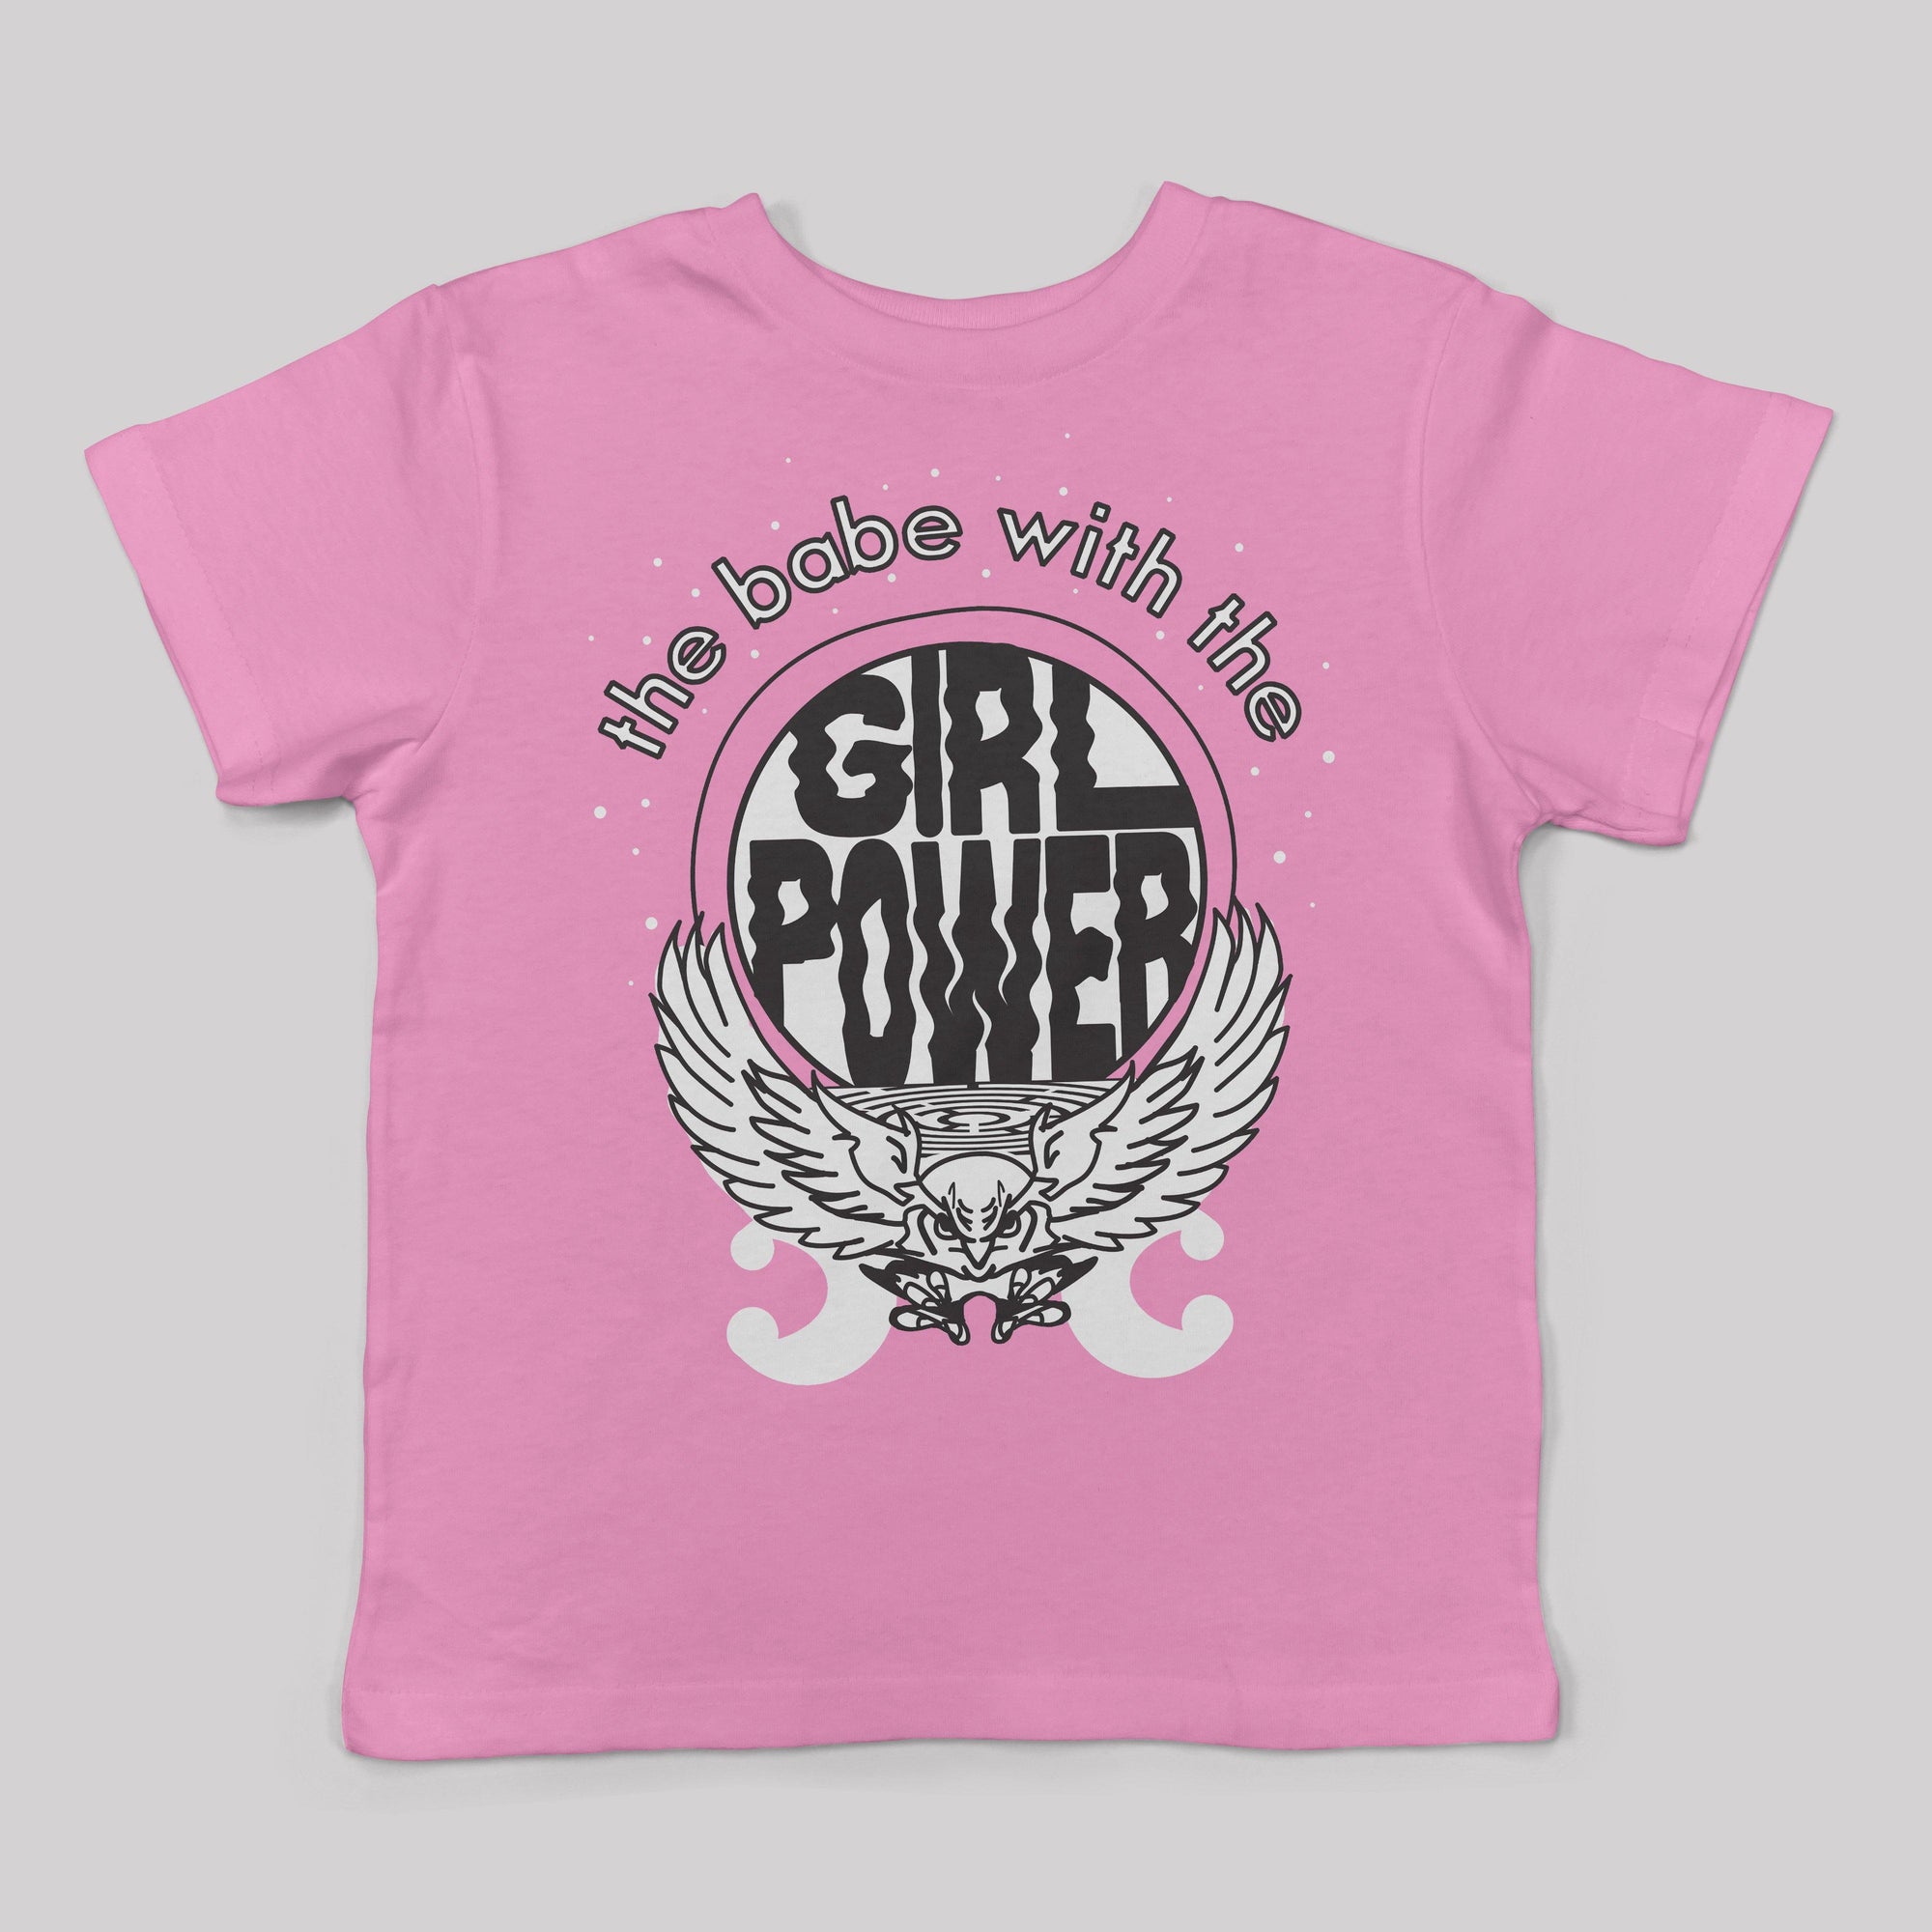 Babe with the Girl Power Tee for Kids - Baby Teith